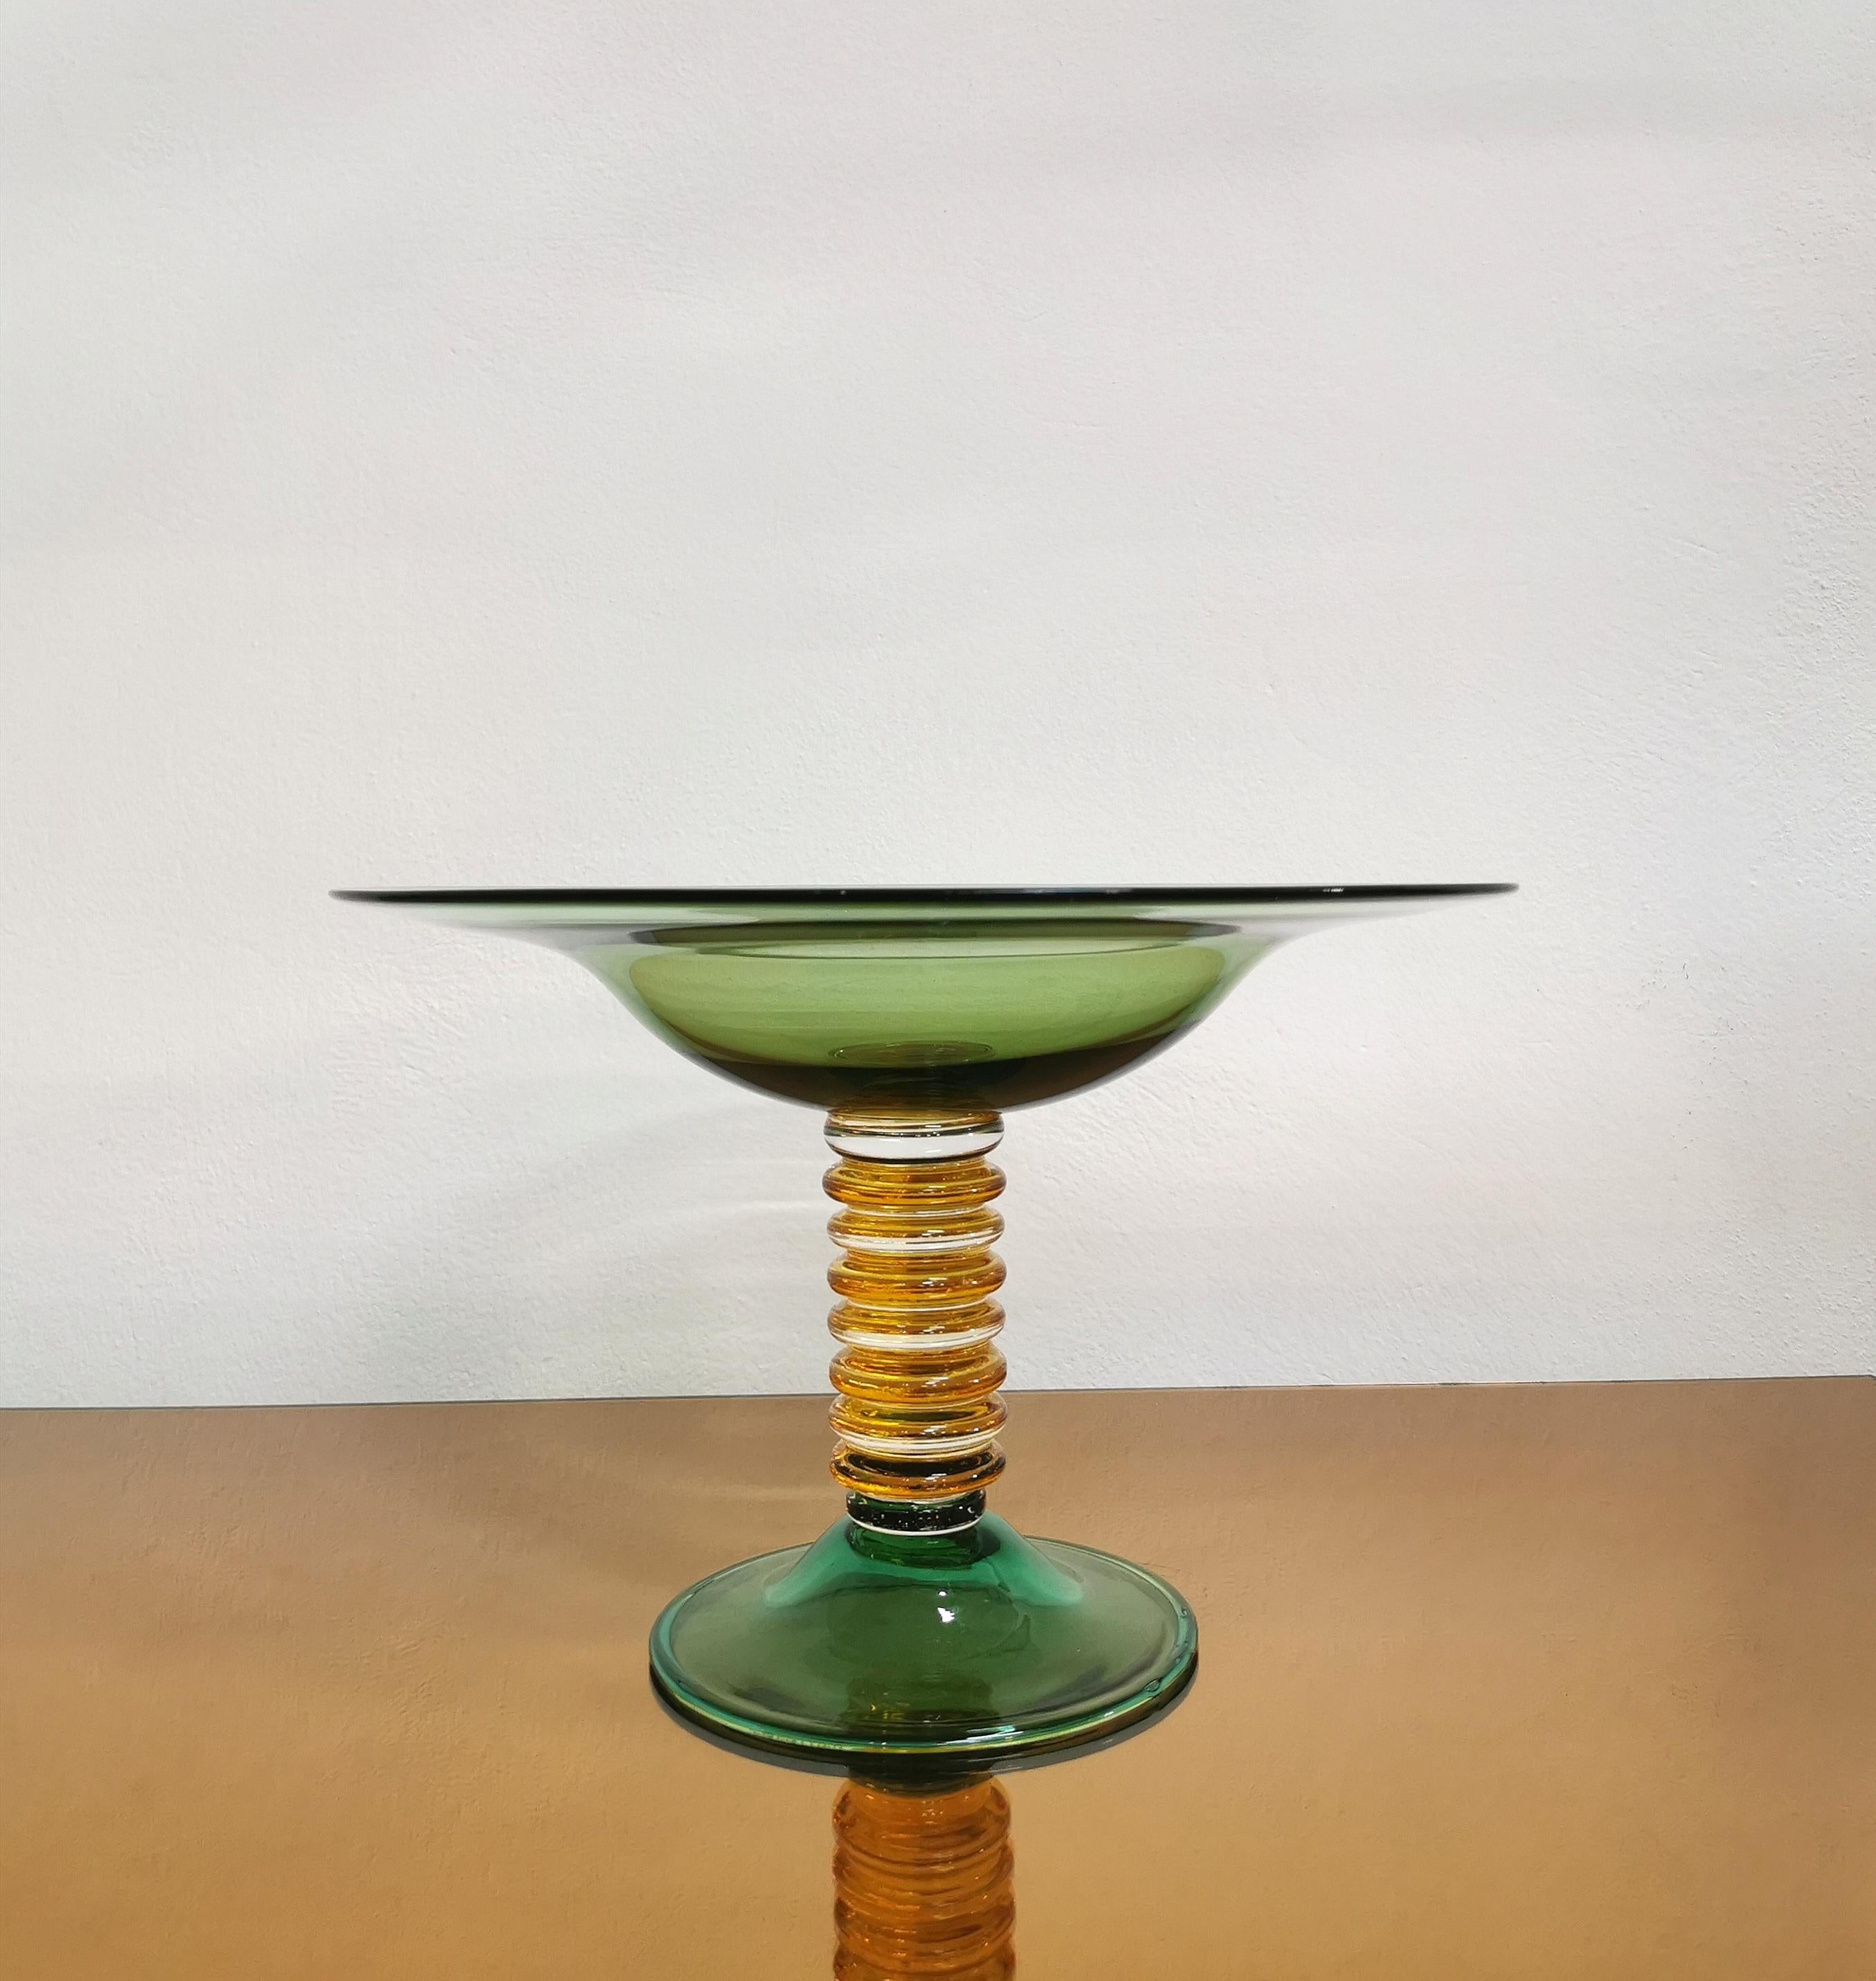 Stand / centerpiece produced by the Venetian company La Murrina in the 70s. The riser is in bottle green Murano glass with a body made of yellow and transparent circular rings.